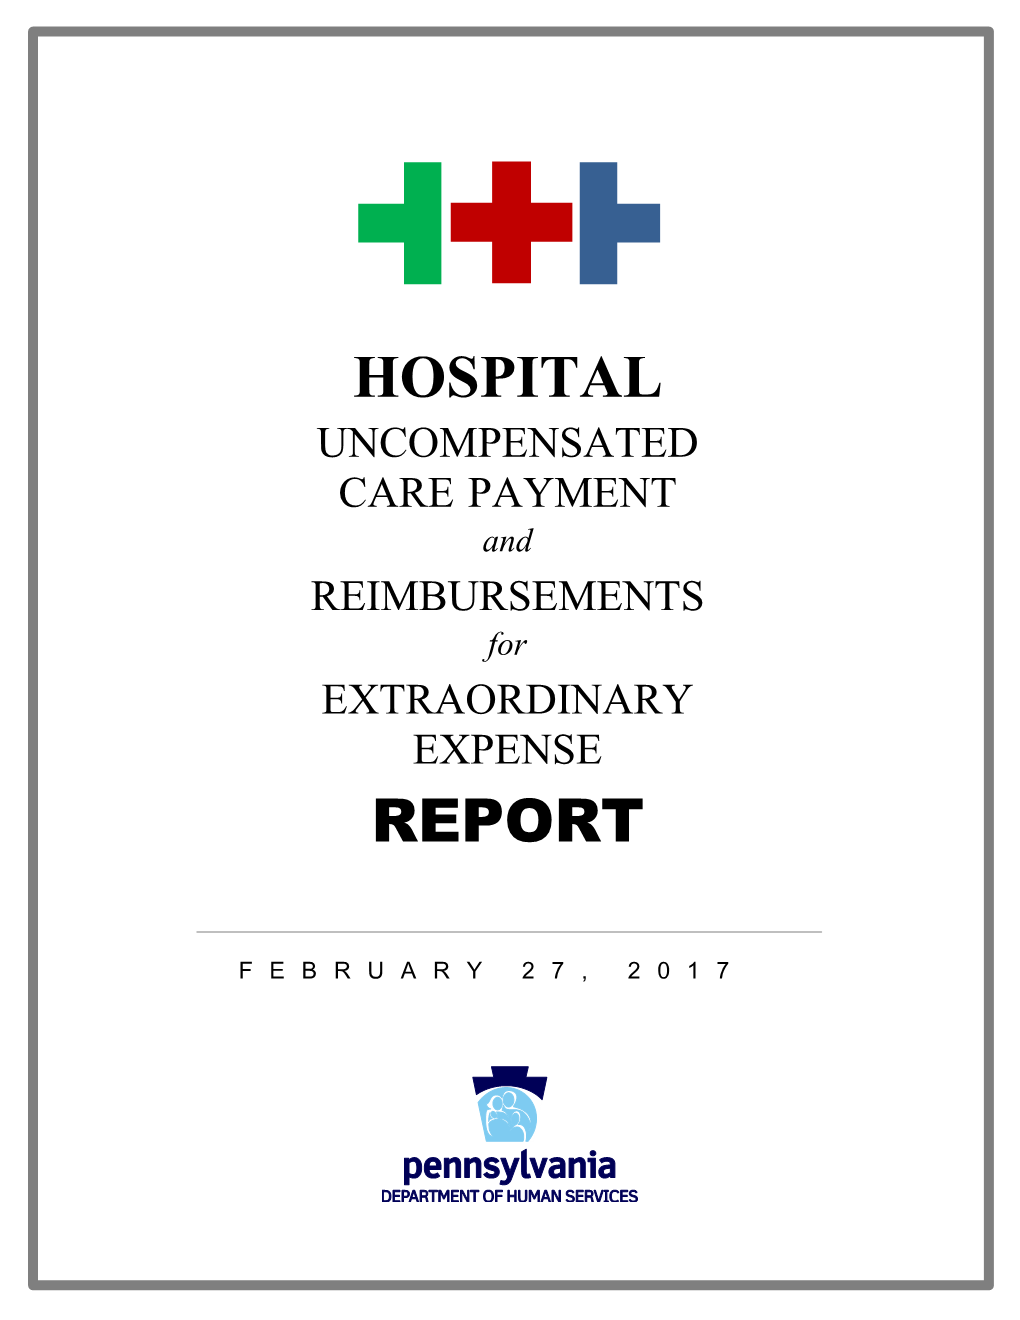 HOSPITAL UNCOMPENSATED CARE PAYMENT and REIMBURSEMENTS for EXTRAORDINARY EXPENSE REPORT